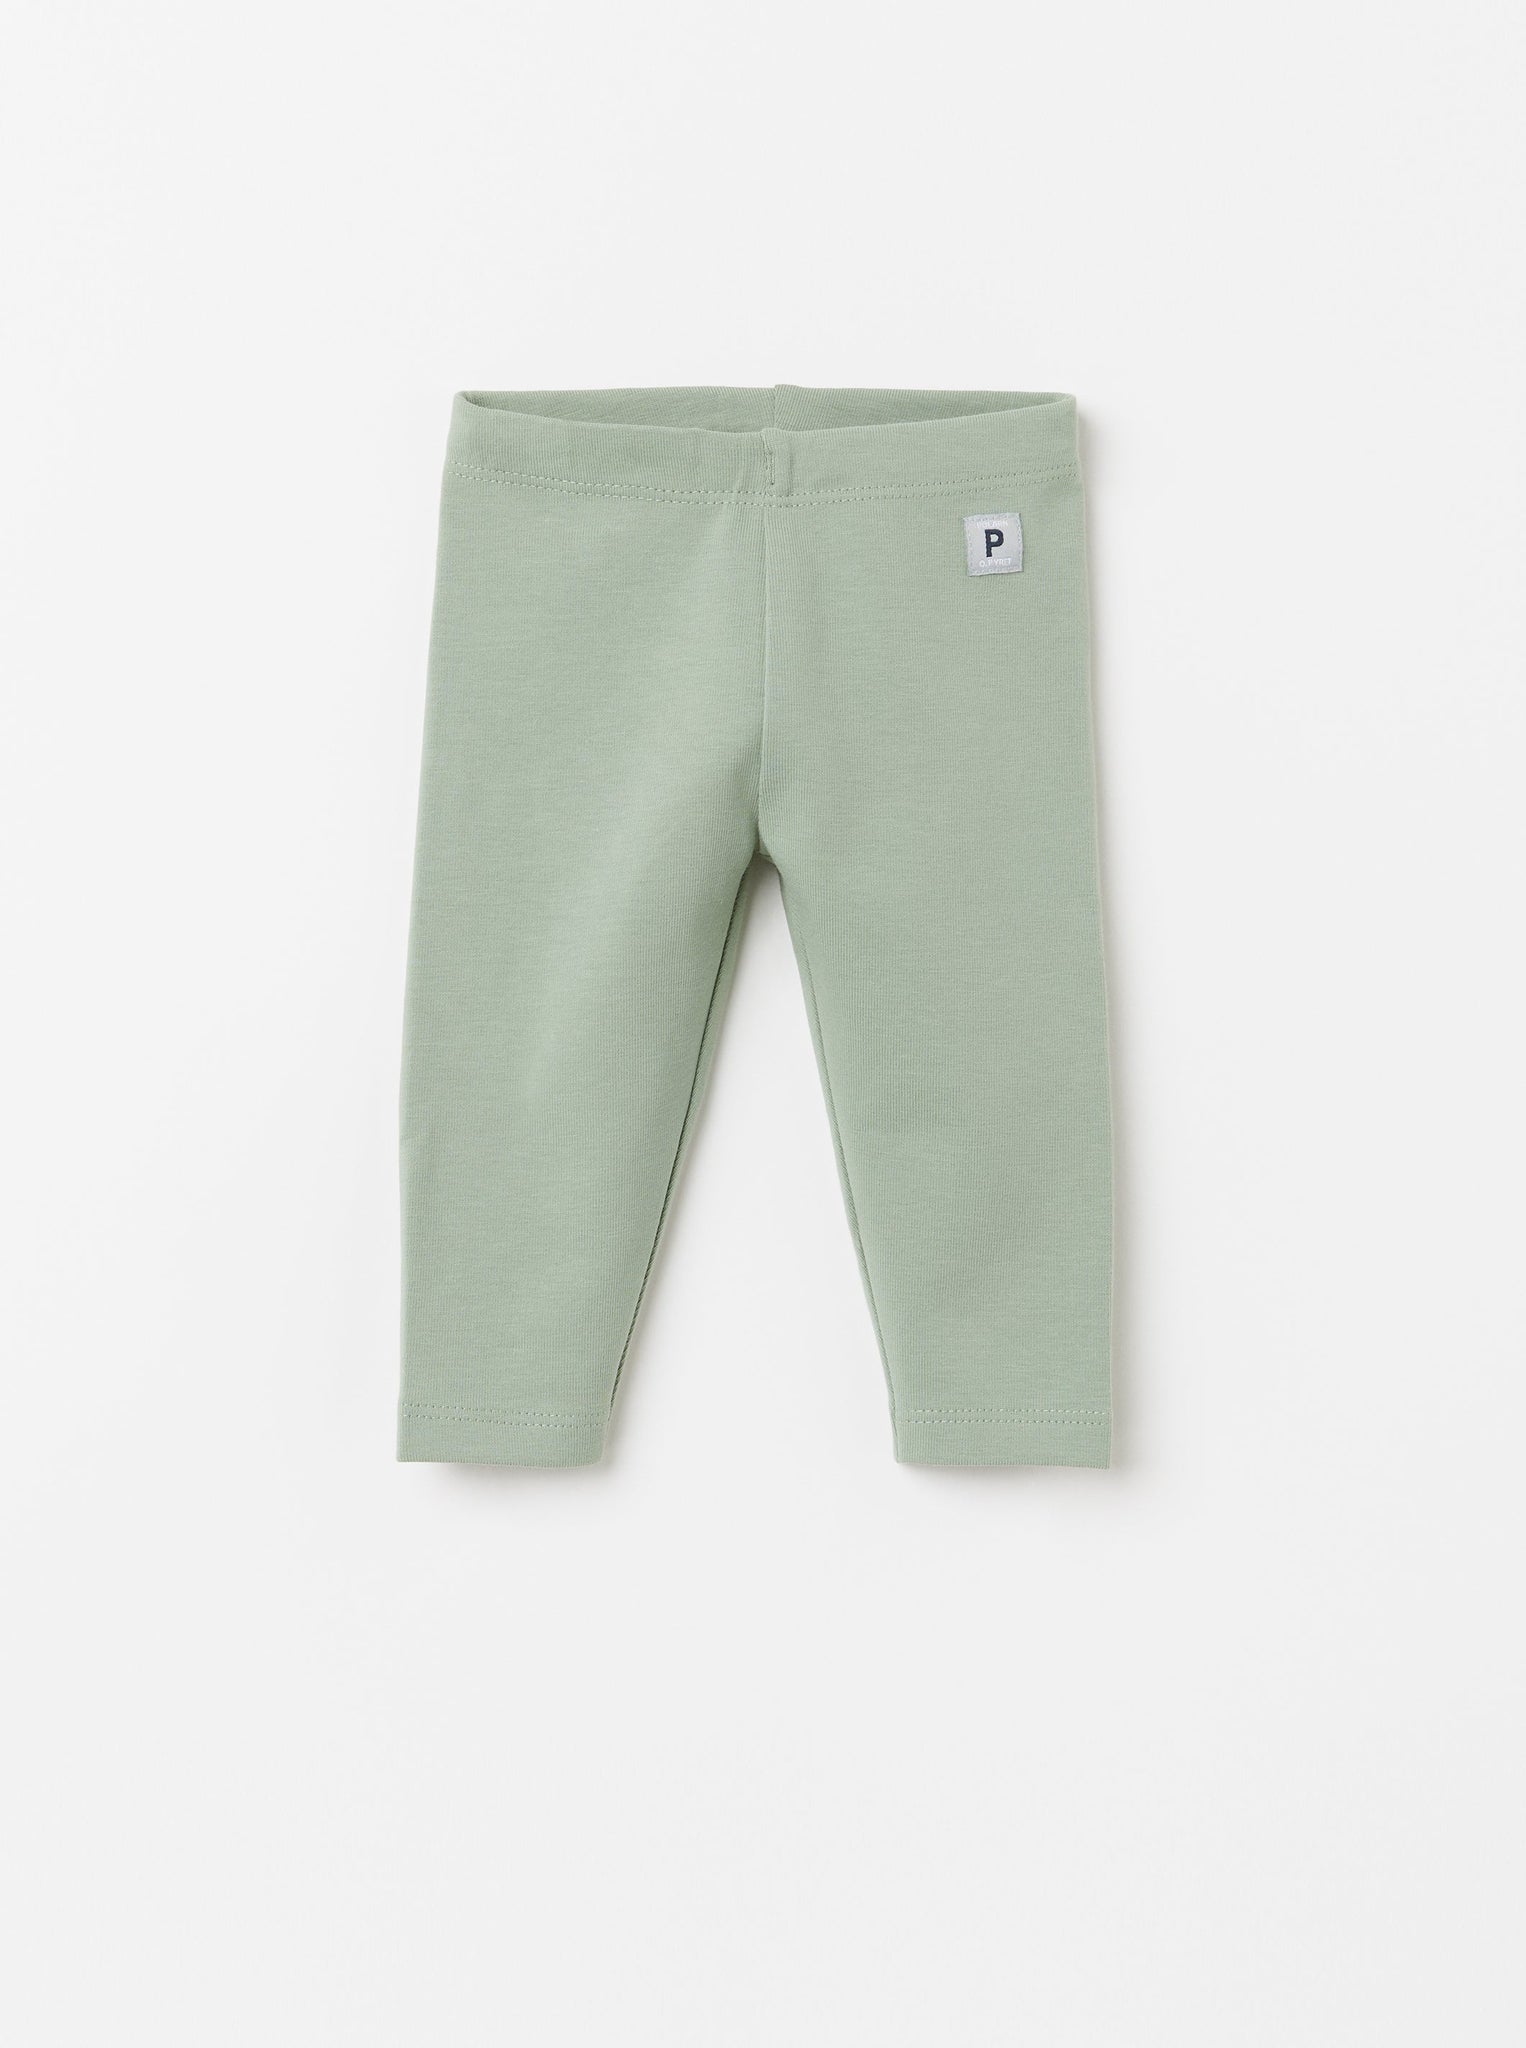 Organic Cotton Green Baby Leggings from the Polarn O. Pyret Kidswear collection. Clothes made using sustainably sourced materials.